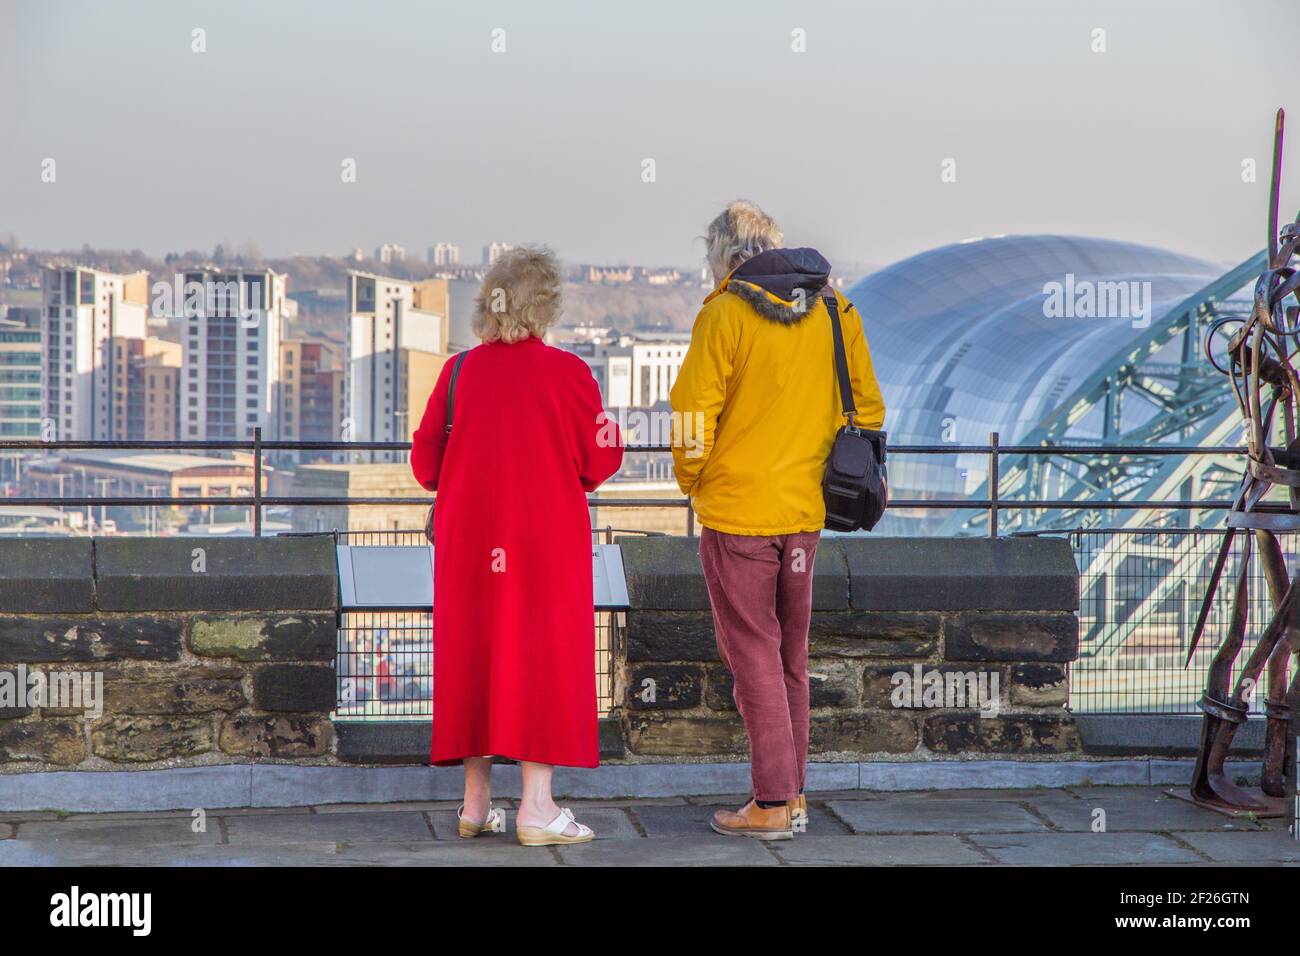 Pair of tourists in sharp focus admiring the view of Newcastle Upon Tyne famous landmarks such as the Tyne Bridge, art gallery, Gateshead music venue, Stock Photo